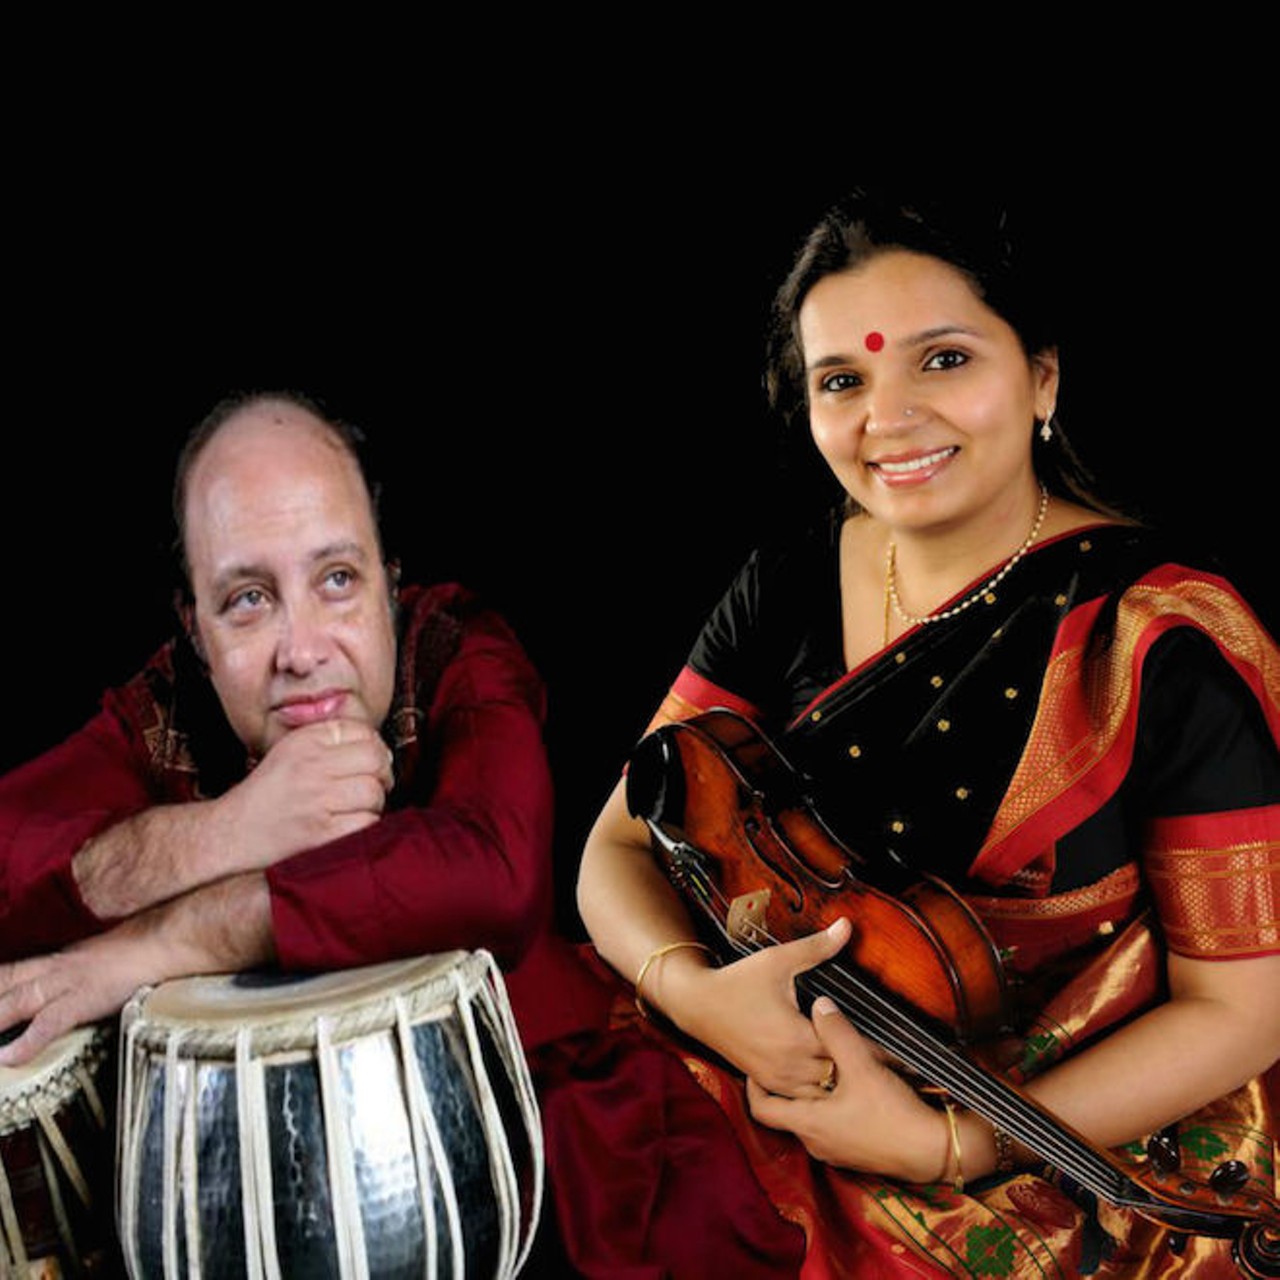 Friday, April 25
An Evening of Indian Music: Kala Ramnath on Violin, Abhijit Banerjee on Tabla
World-class musicians presented by the Asian Cultural Association.